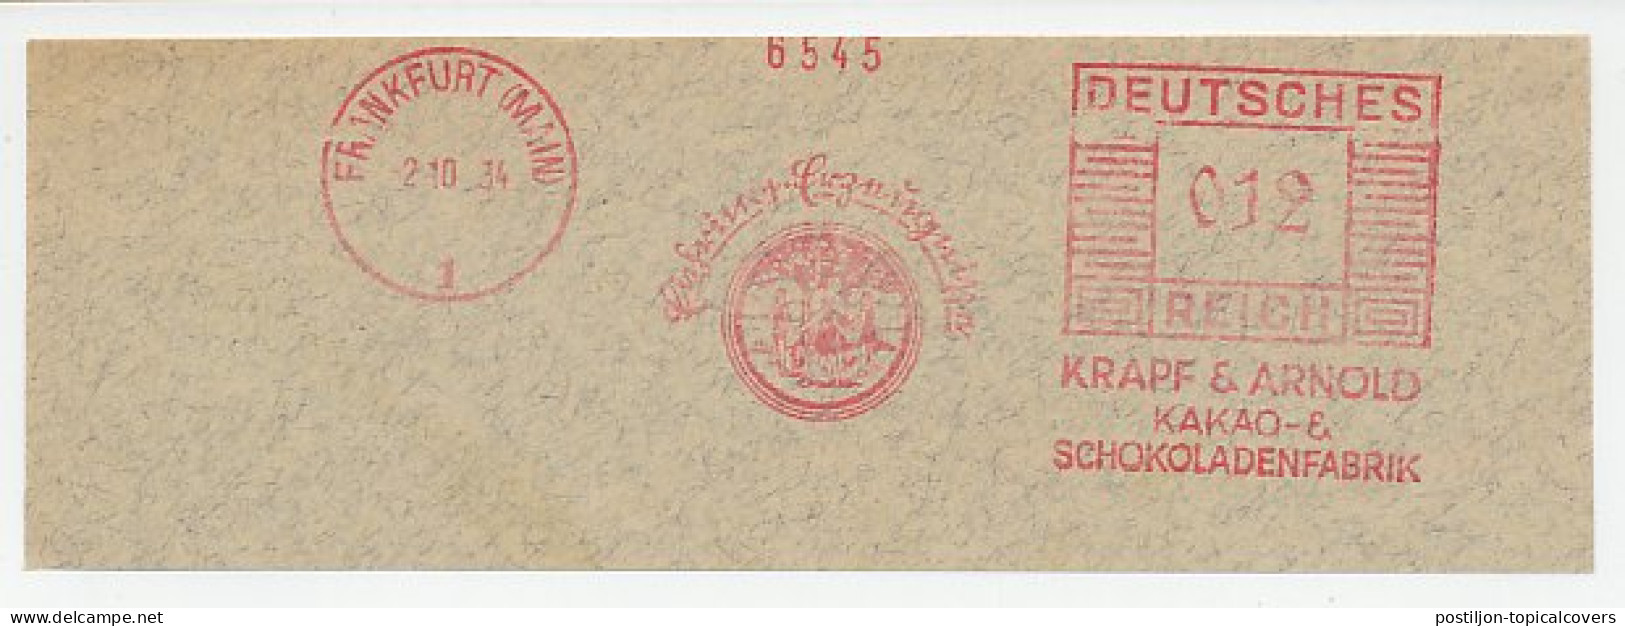 Meter Cut Deutsches Reich / Germany 1934 Chocolate - Cocoa - Food